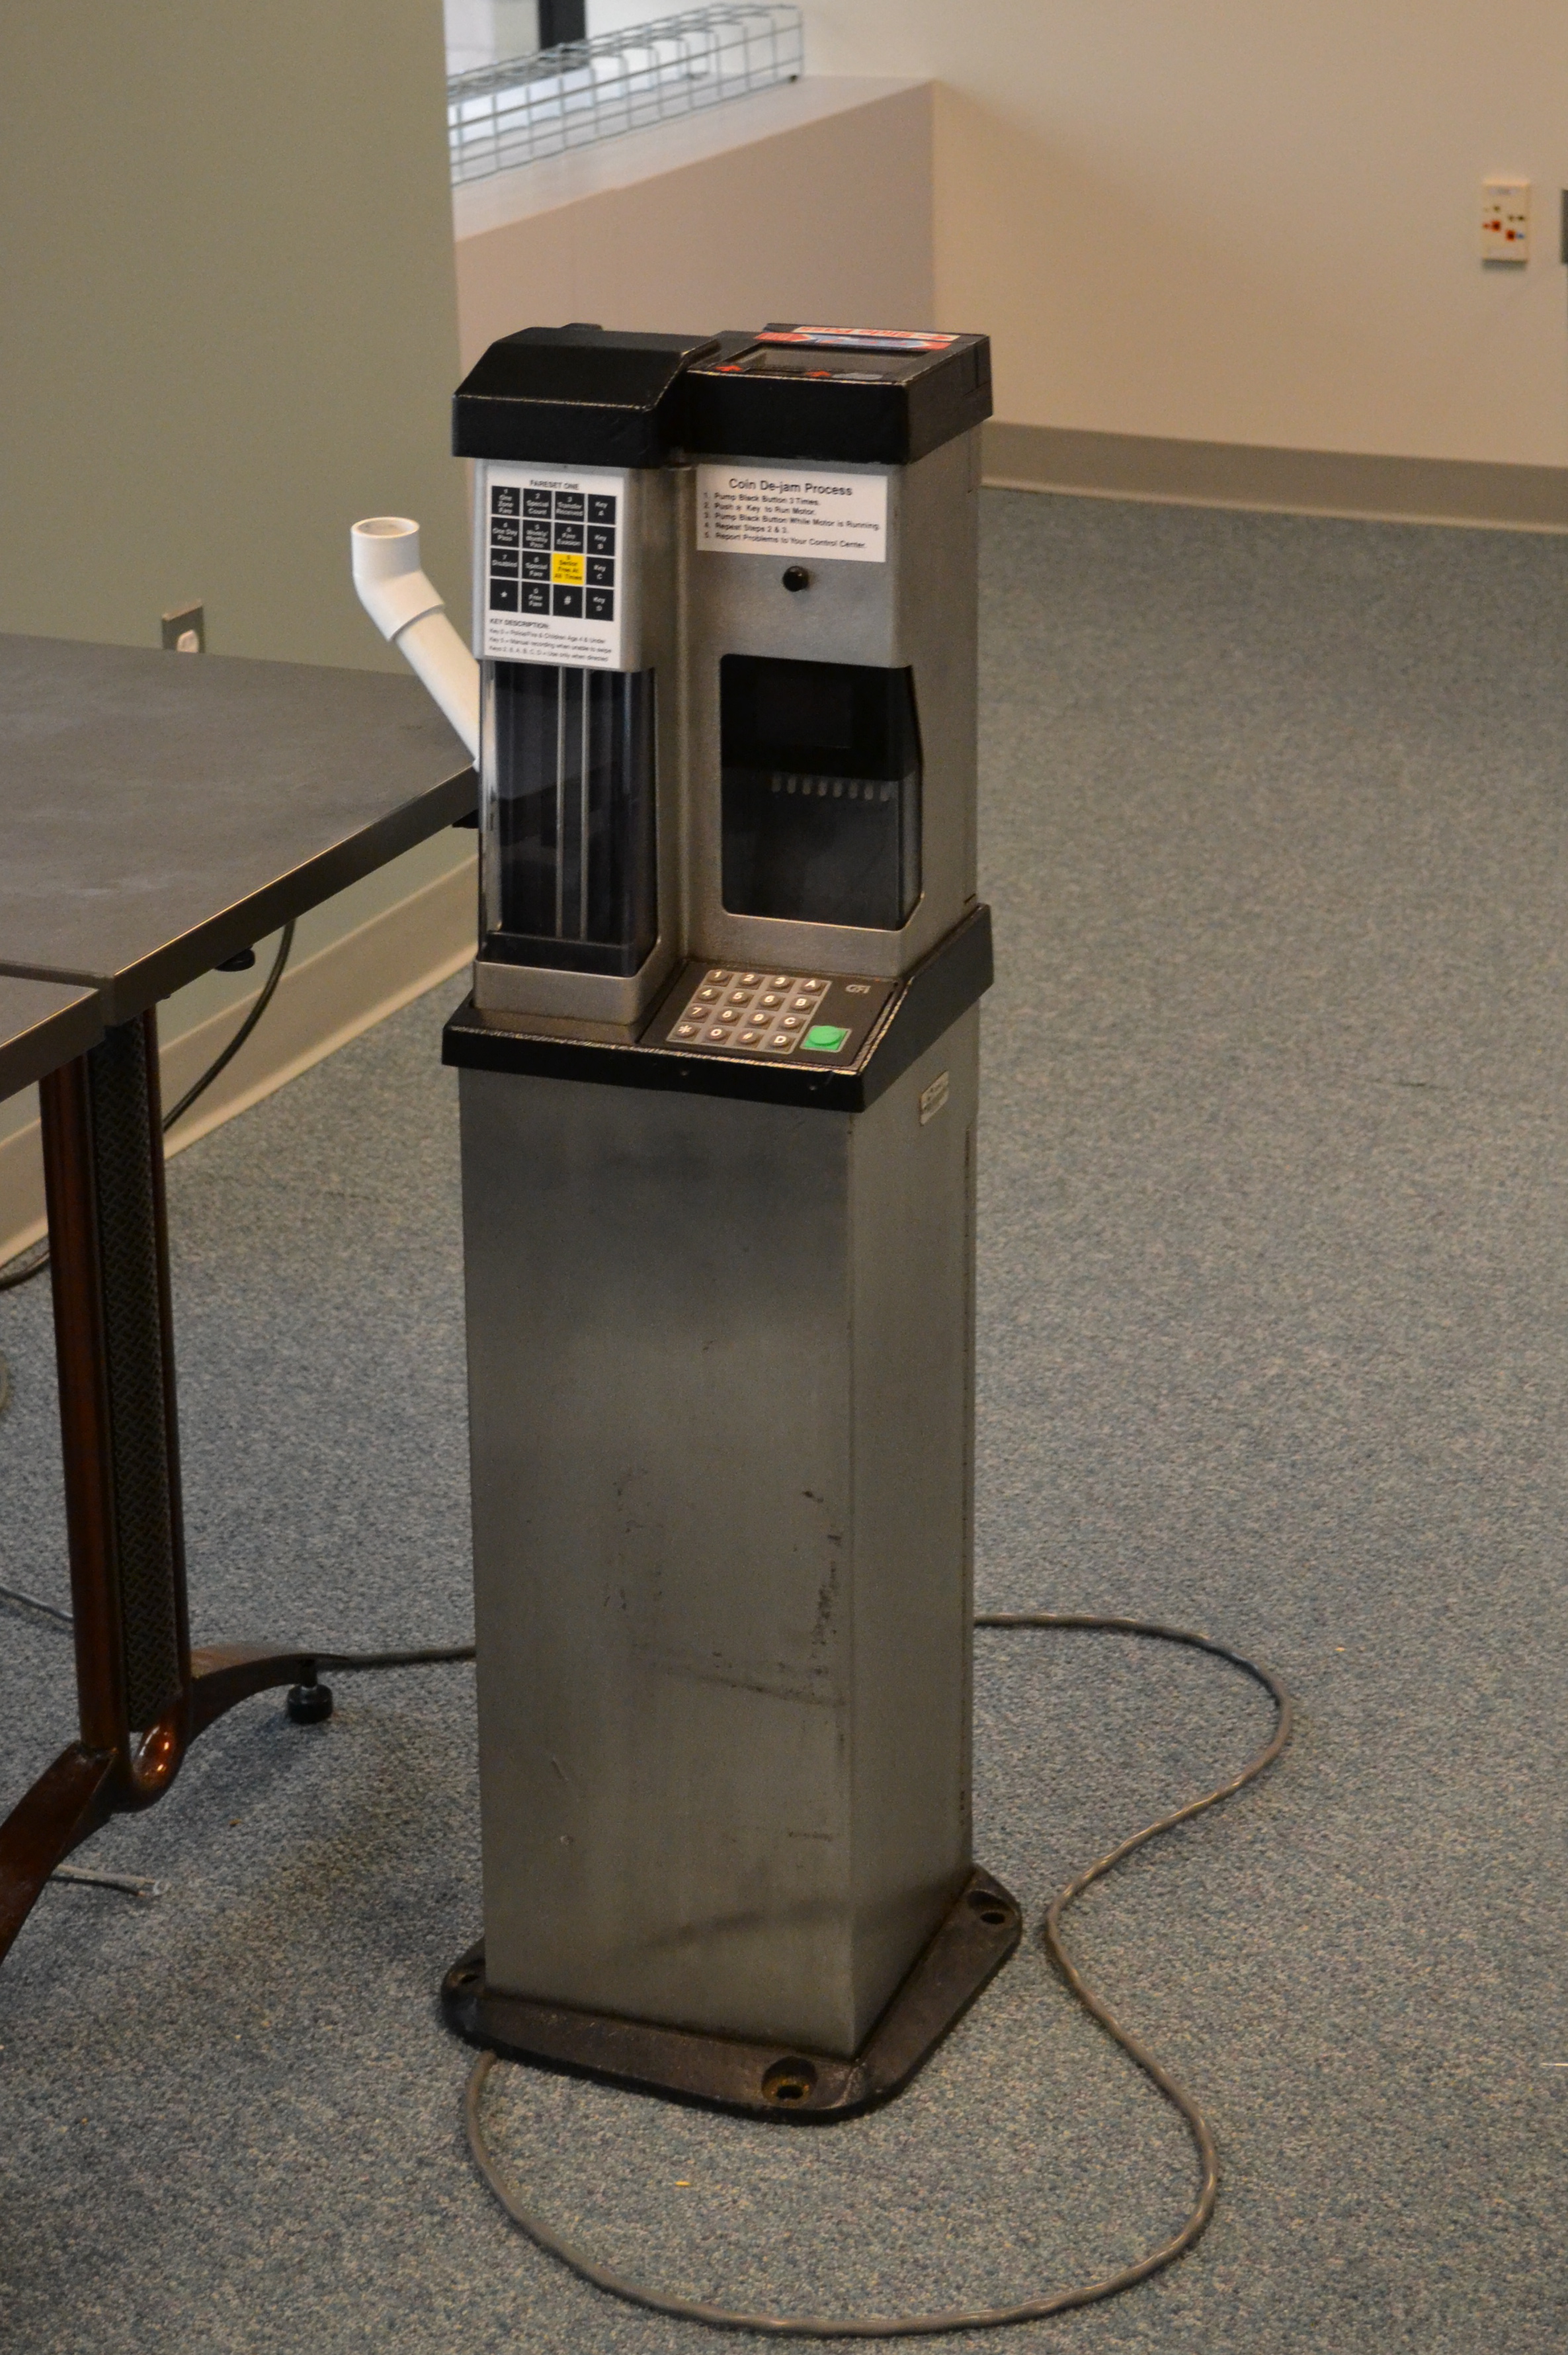 The bus and trolley fare boxes, which were updated fairly recently, will not be replaced but modified